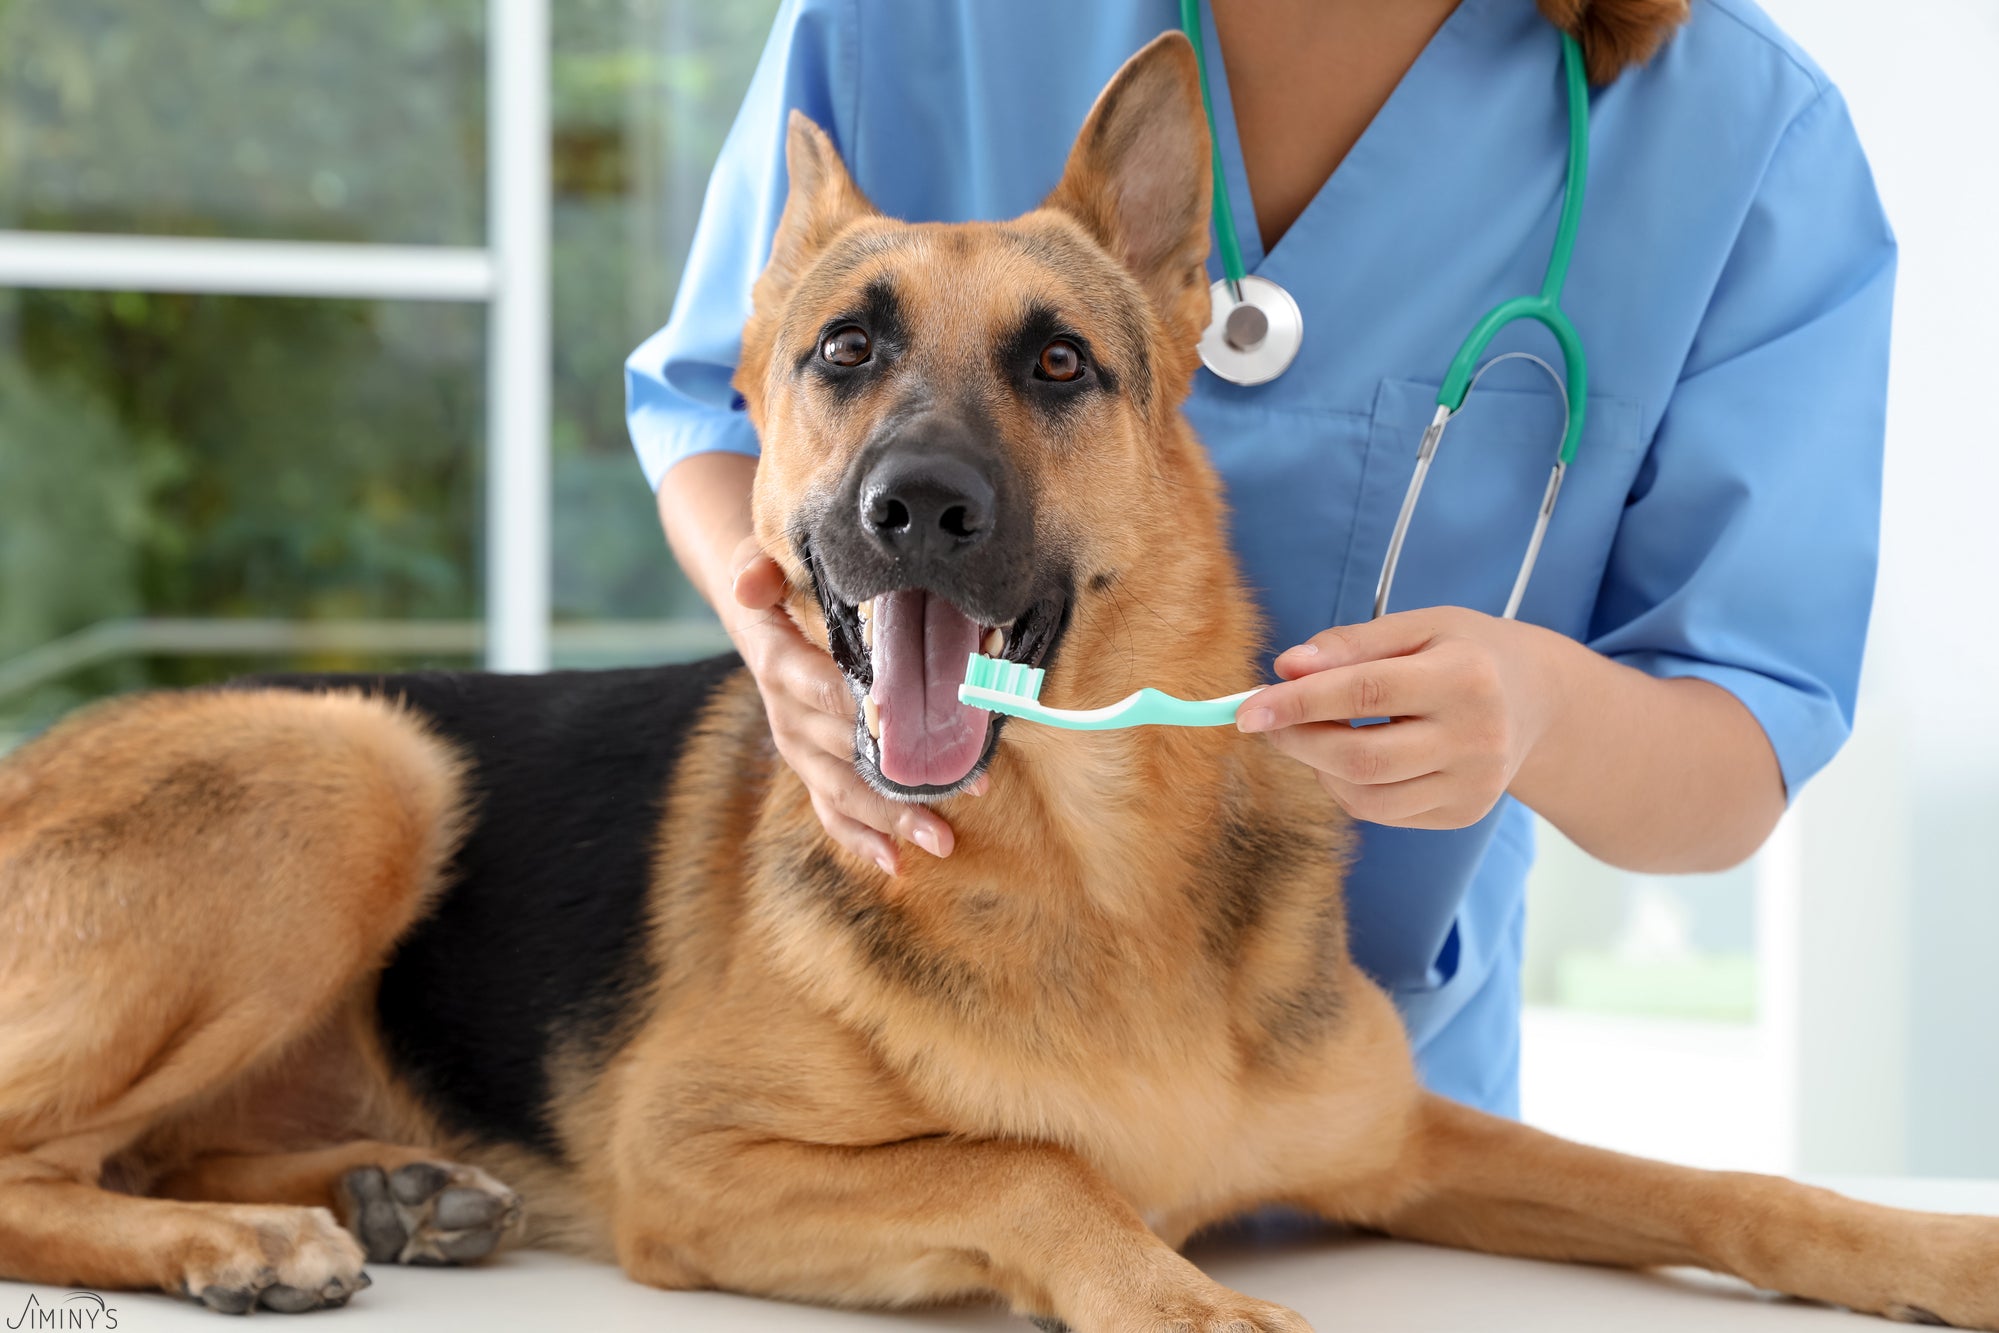 Dog at vet with a toothbrush